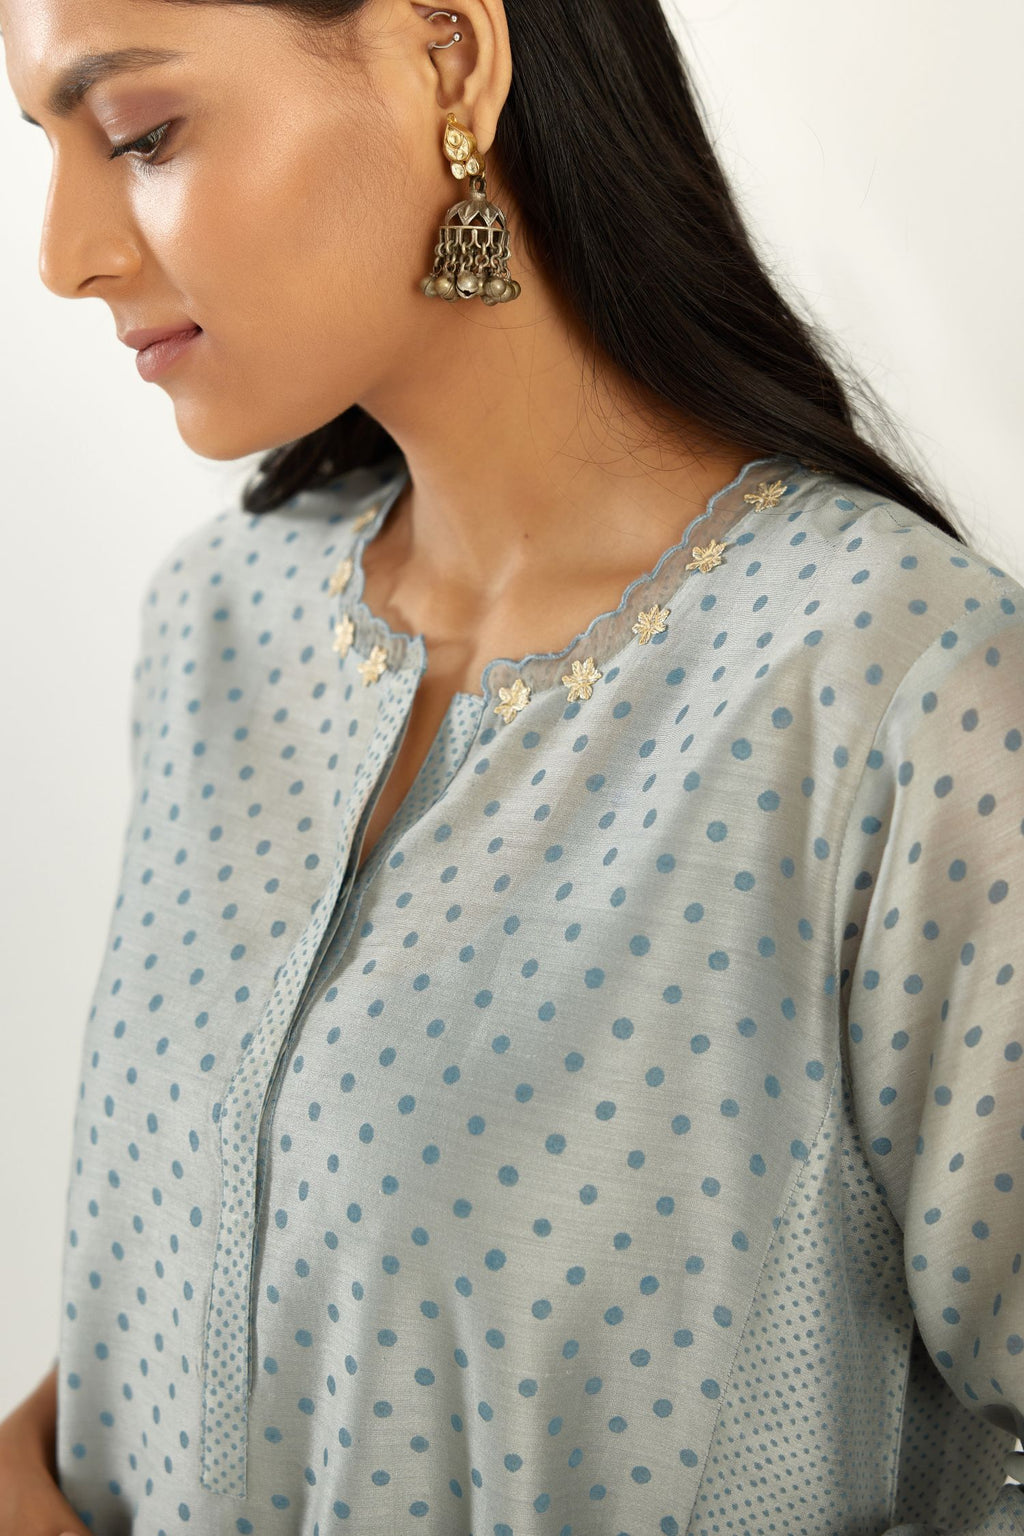 Blue hand block printed silk chanderi kurta set with concealed button placket neckline, Highlighted with gota flower and scalloped organza at edges.